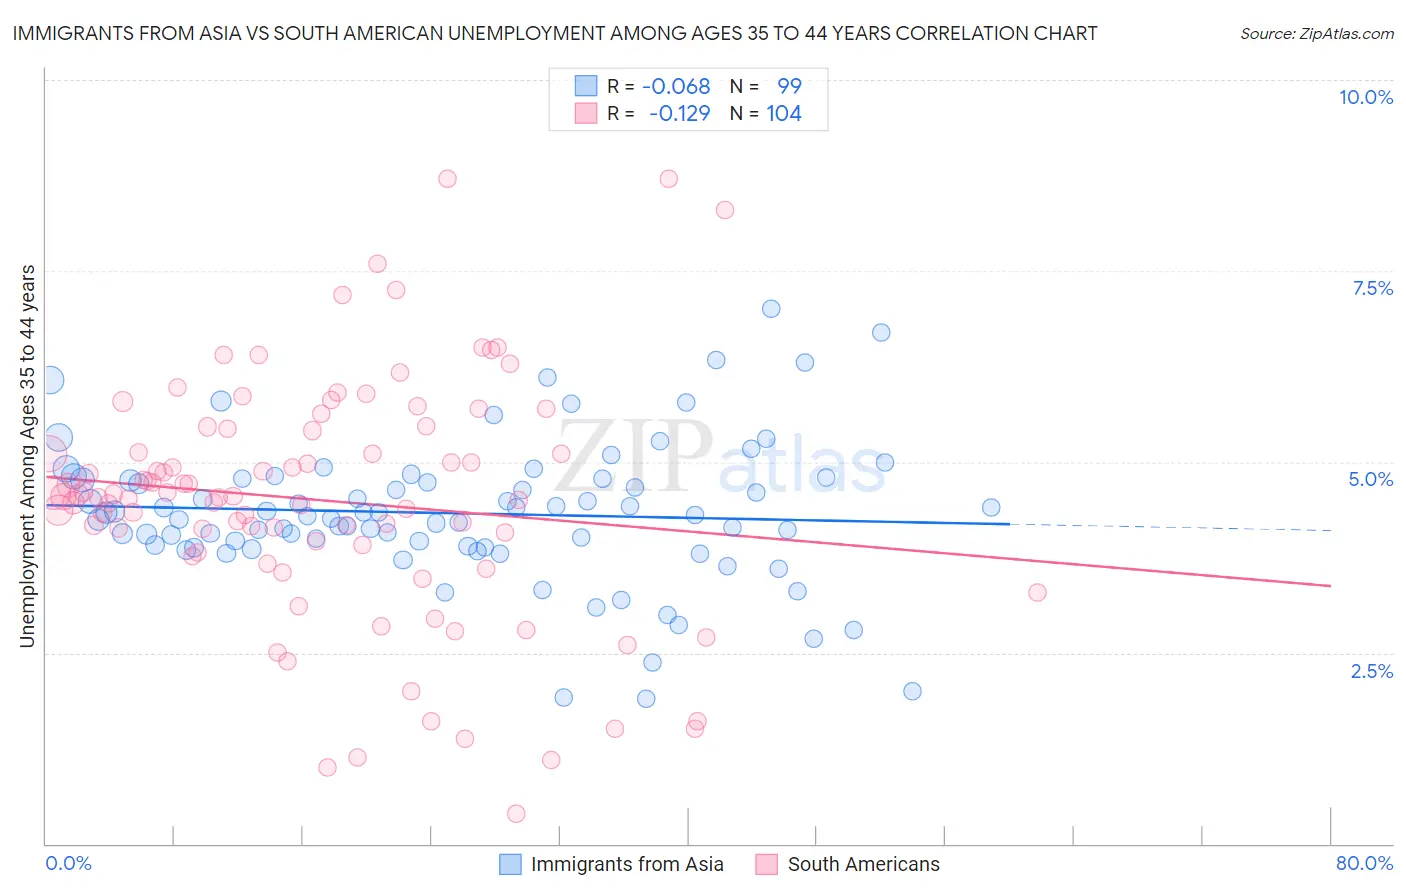 Immigrants from Asia vs South American Unemployment Among Ages 35 to 44 years